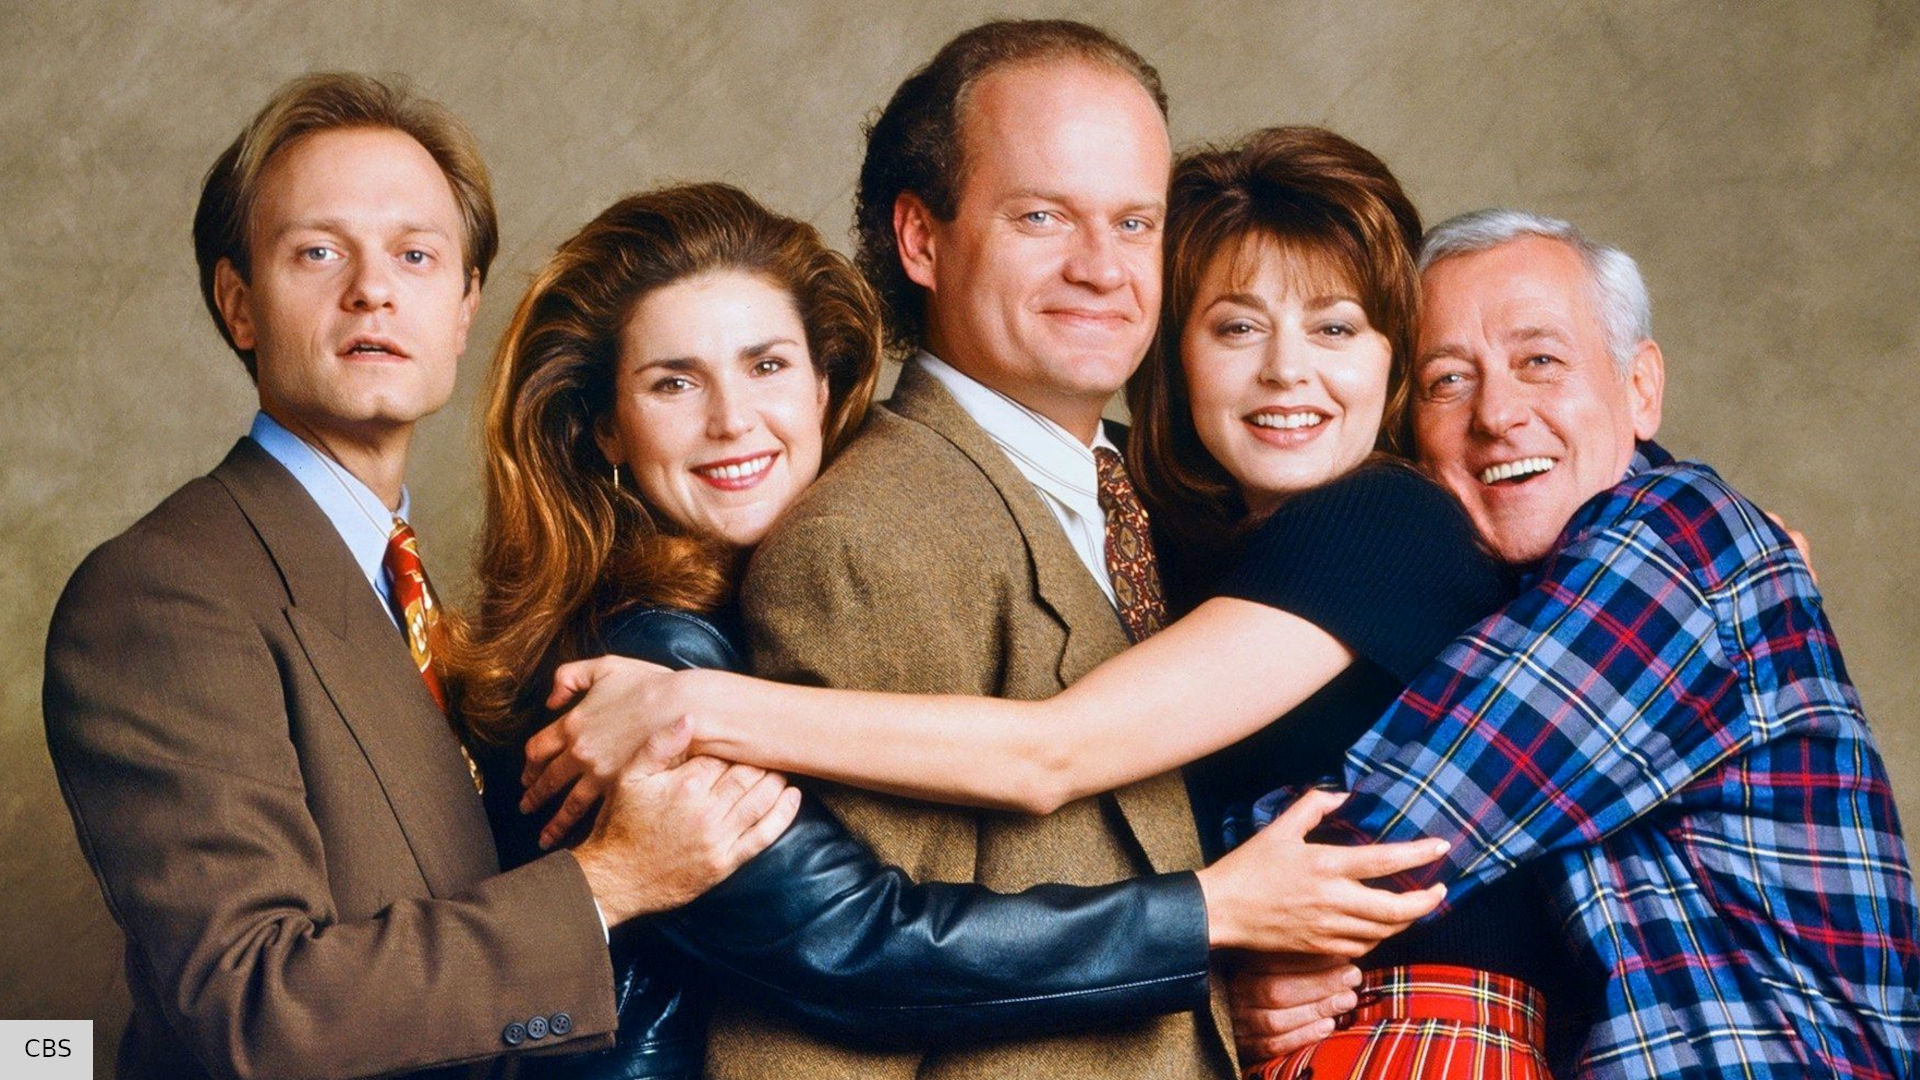 Frasier reboot release date speculation, plot, cast, and more The